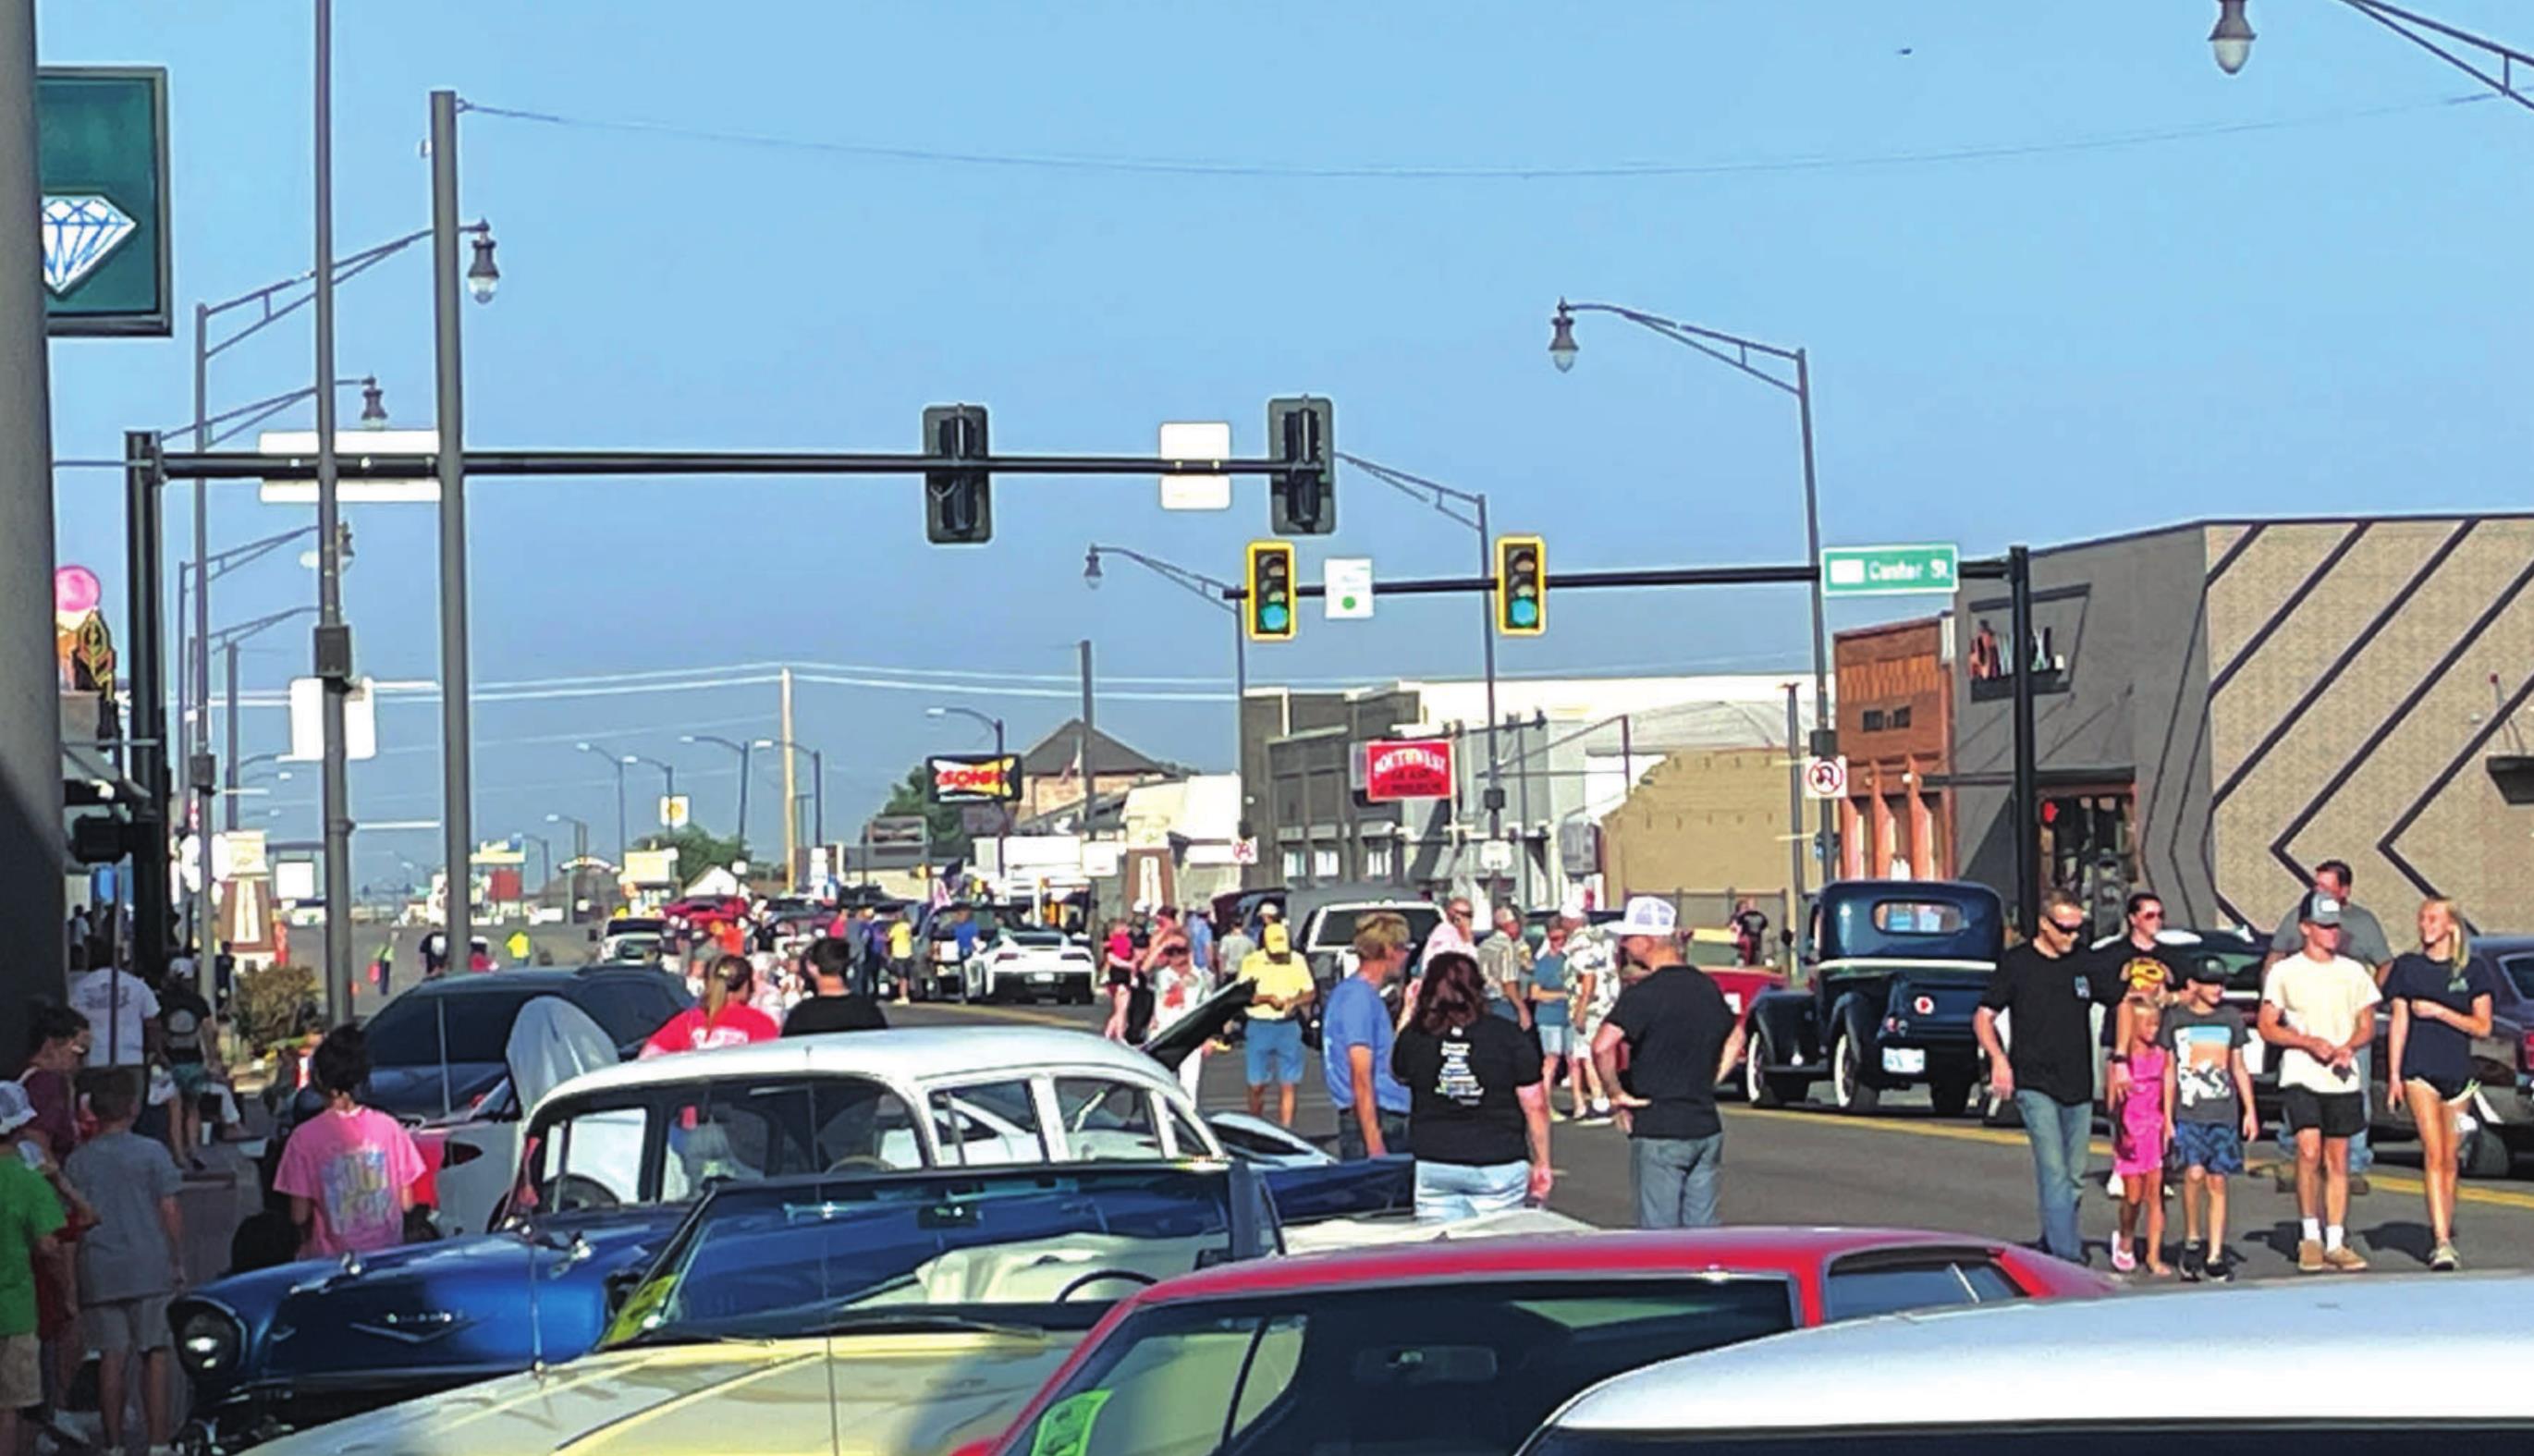 Heartland cruise and car show draw large crowd